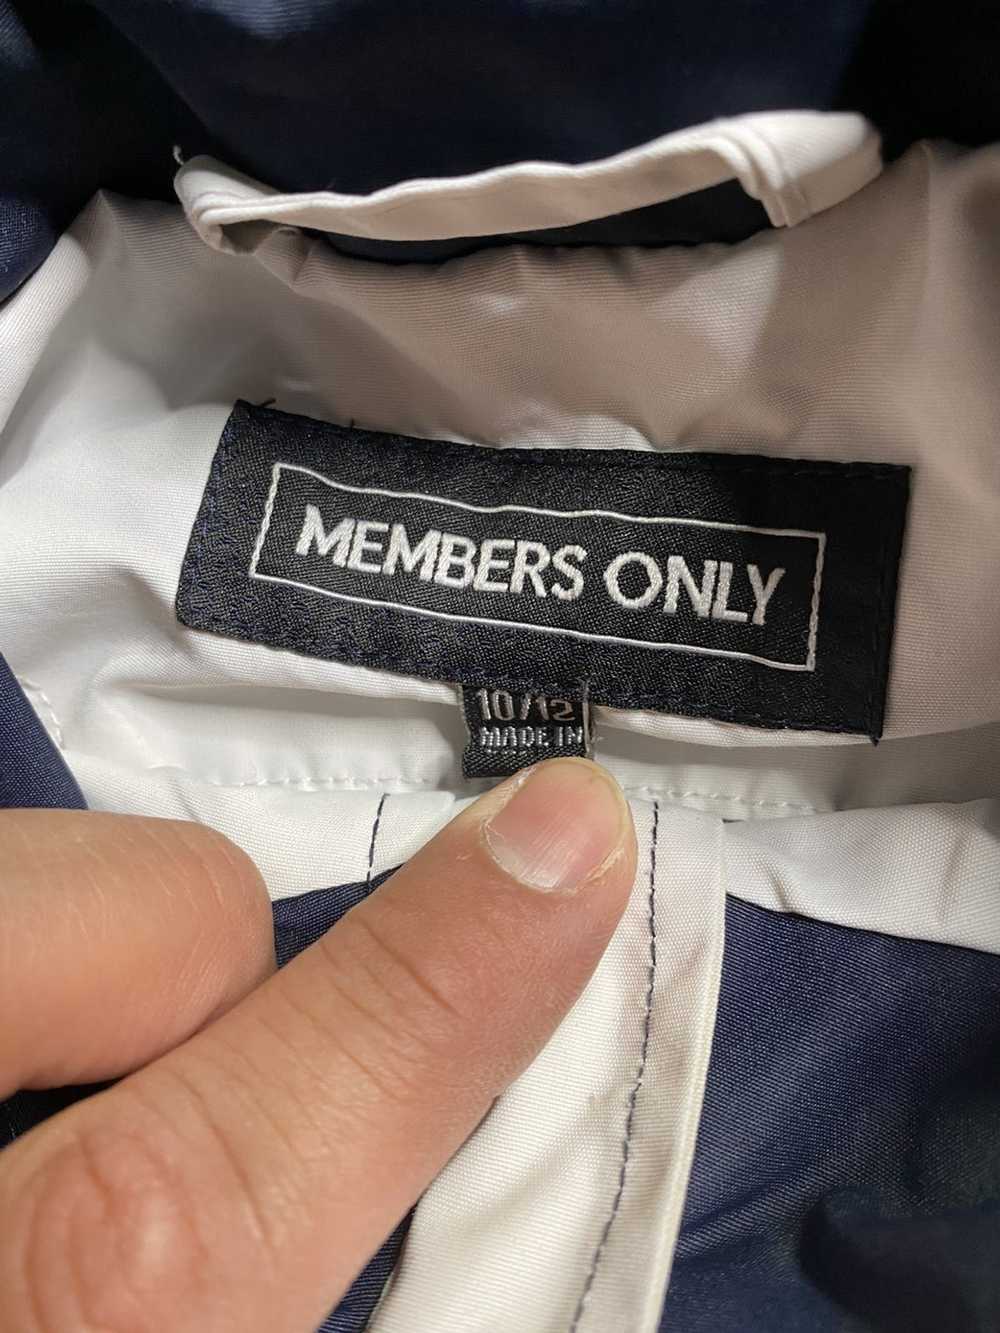 Members Only Members Only Kids Jacket 10/12 Blue … - image 4